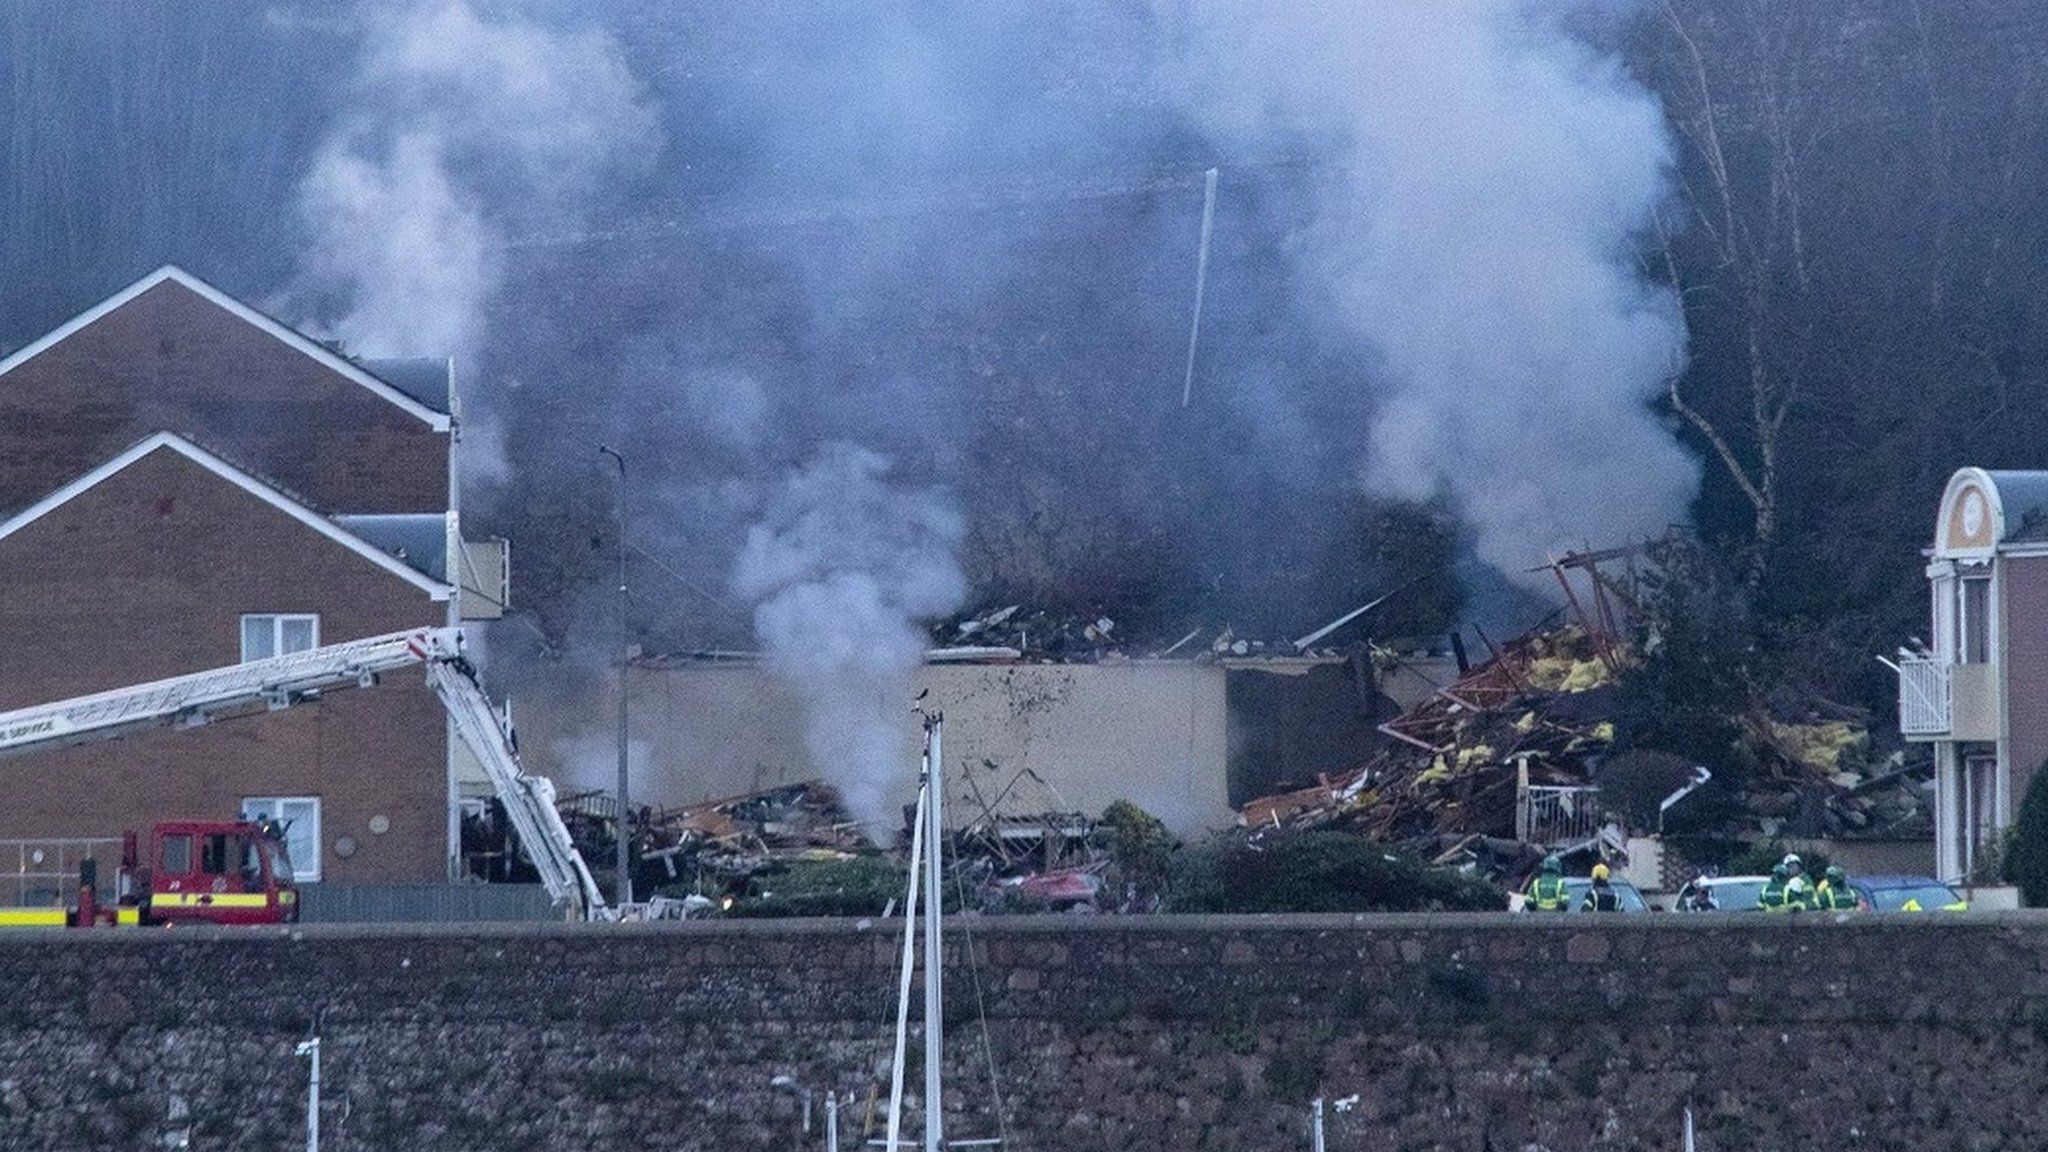 View of the devastation of the smoking wreckage after the explosion